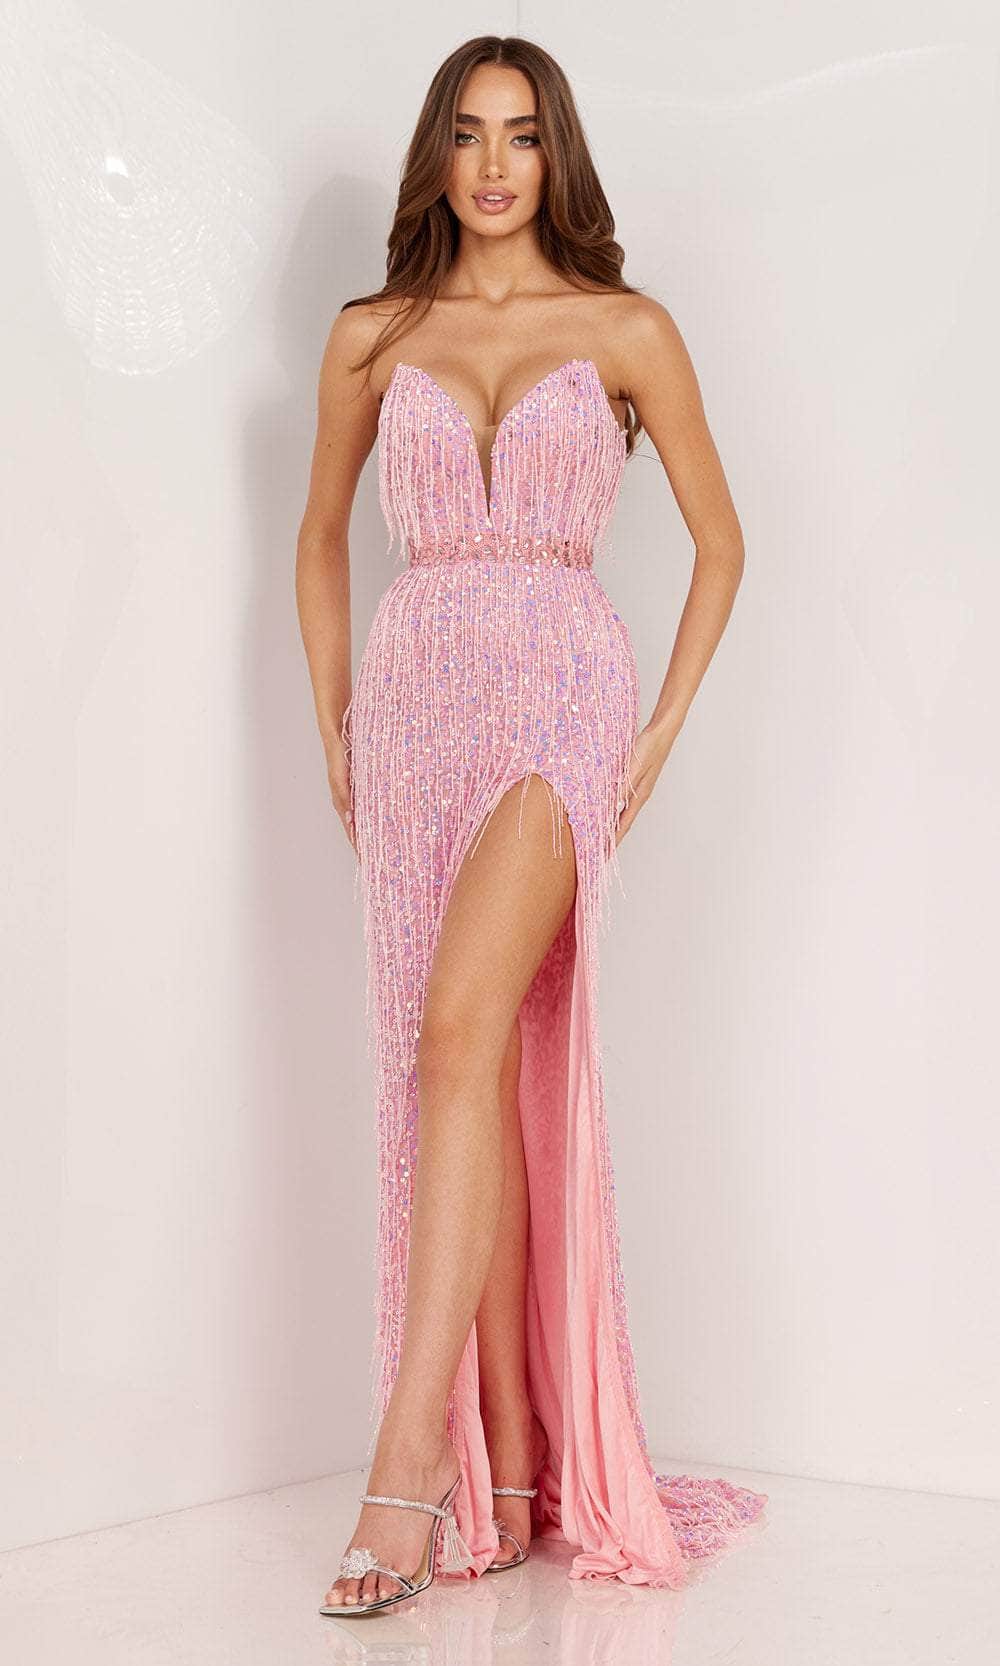 Image of Aleta Couture 1228 - Plunging V-Neck Fringed Evening Gown